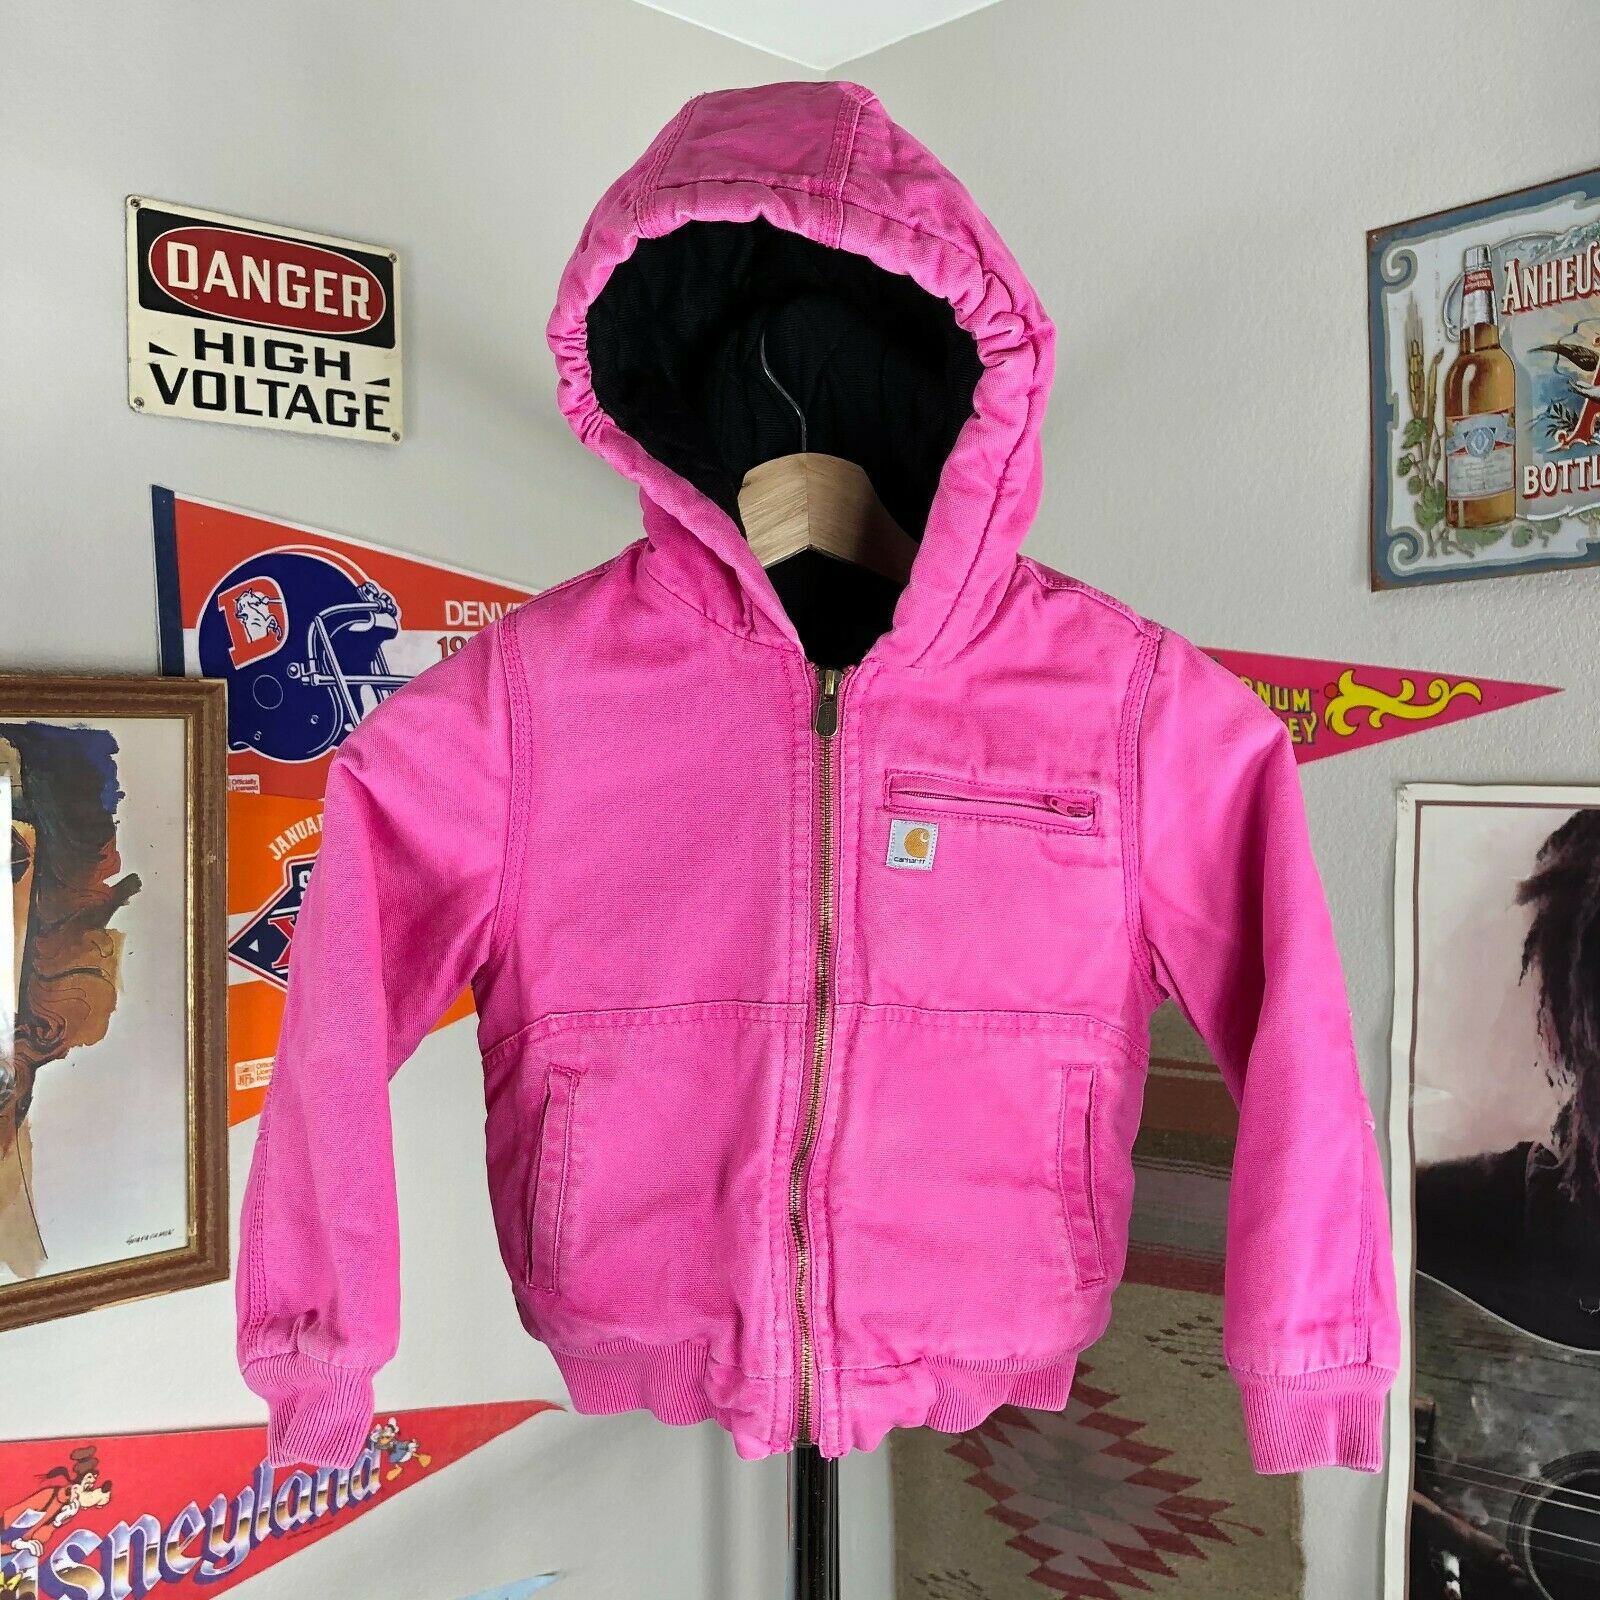 Carhartt Canvas Jacket Coat Lined Pink Youth Girls Size Xs 6